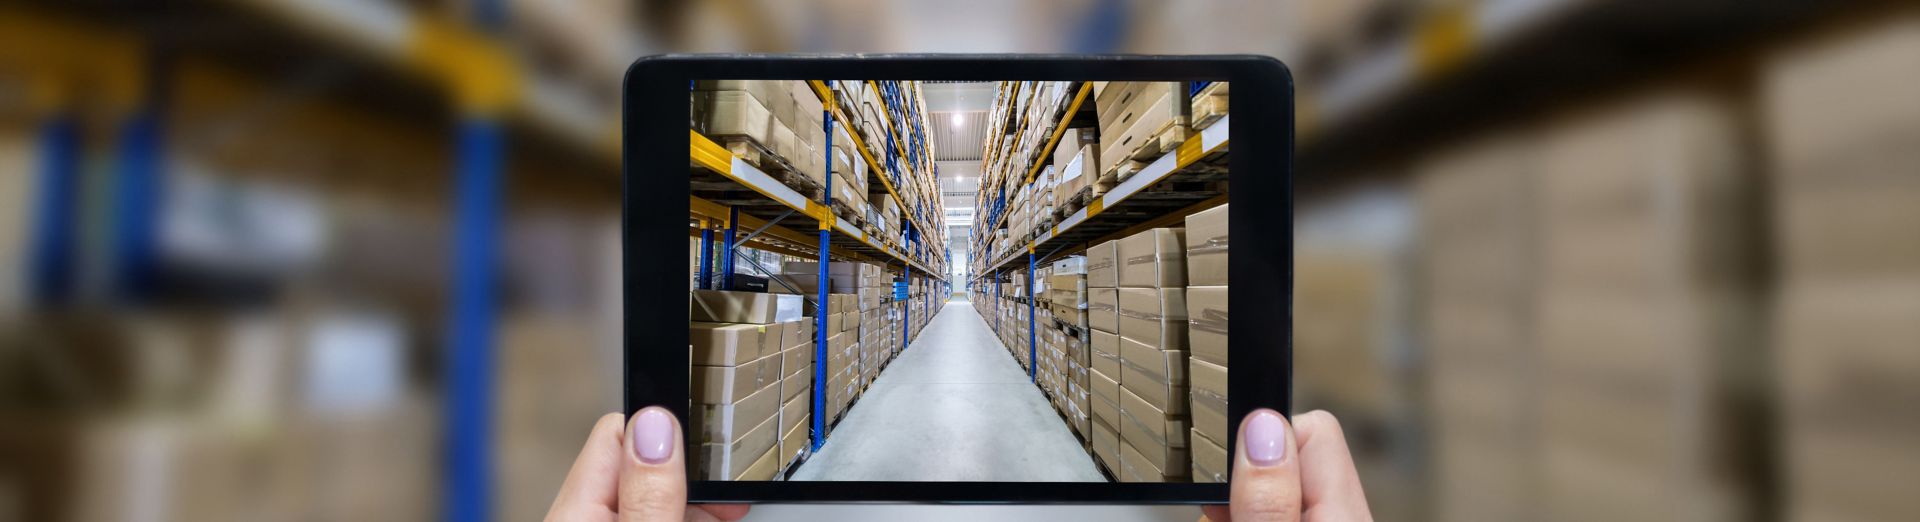 Supply chain software in a warehouse